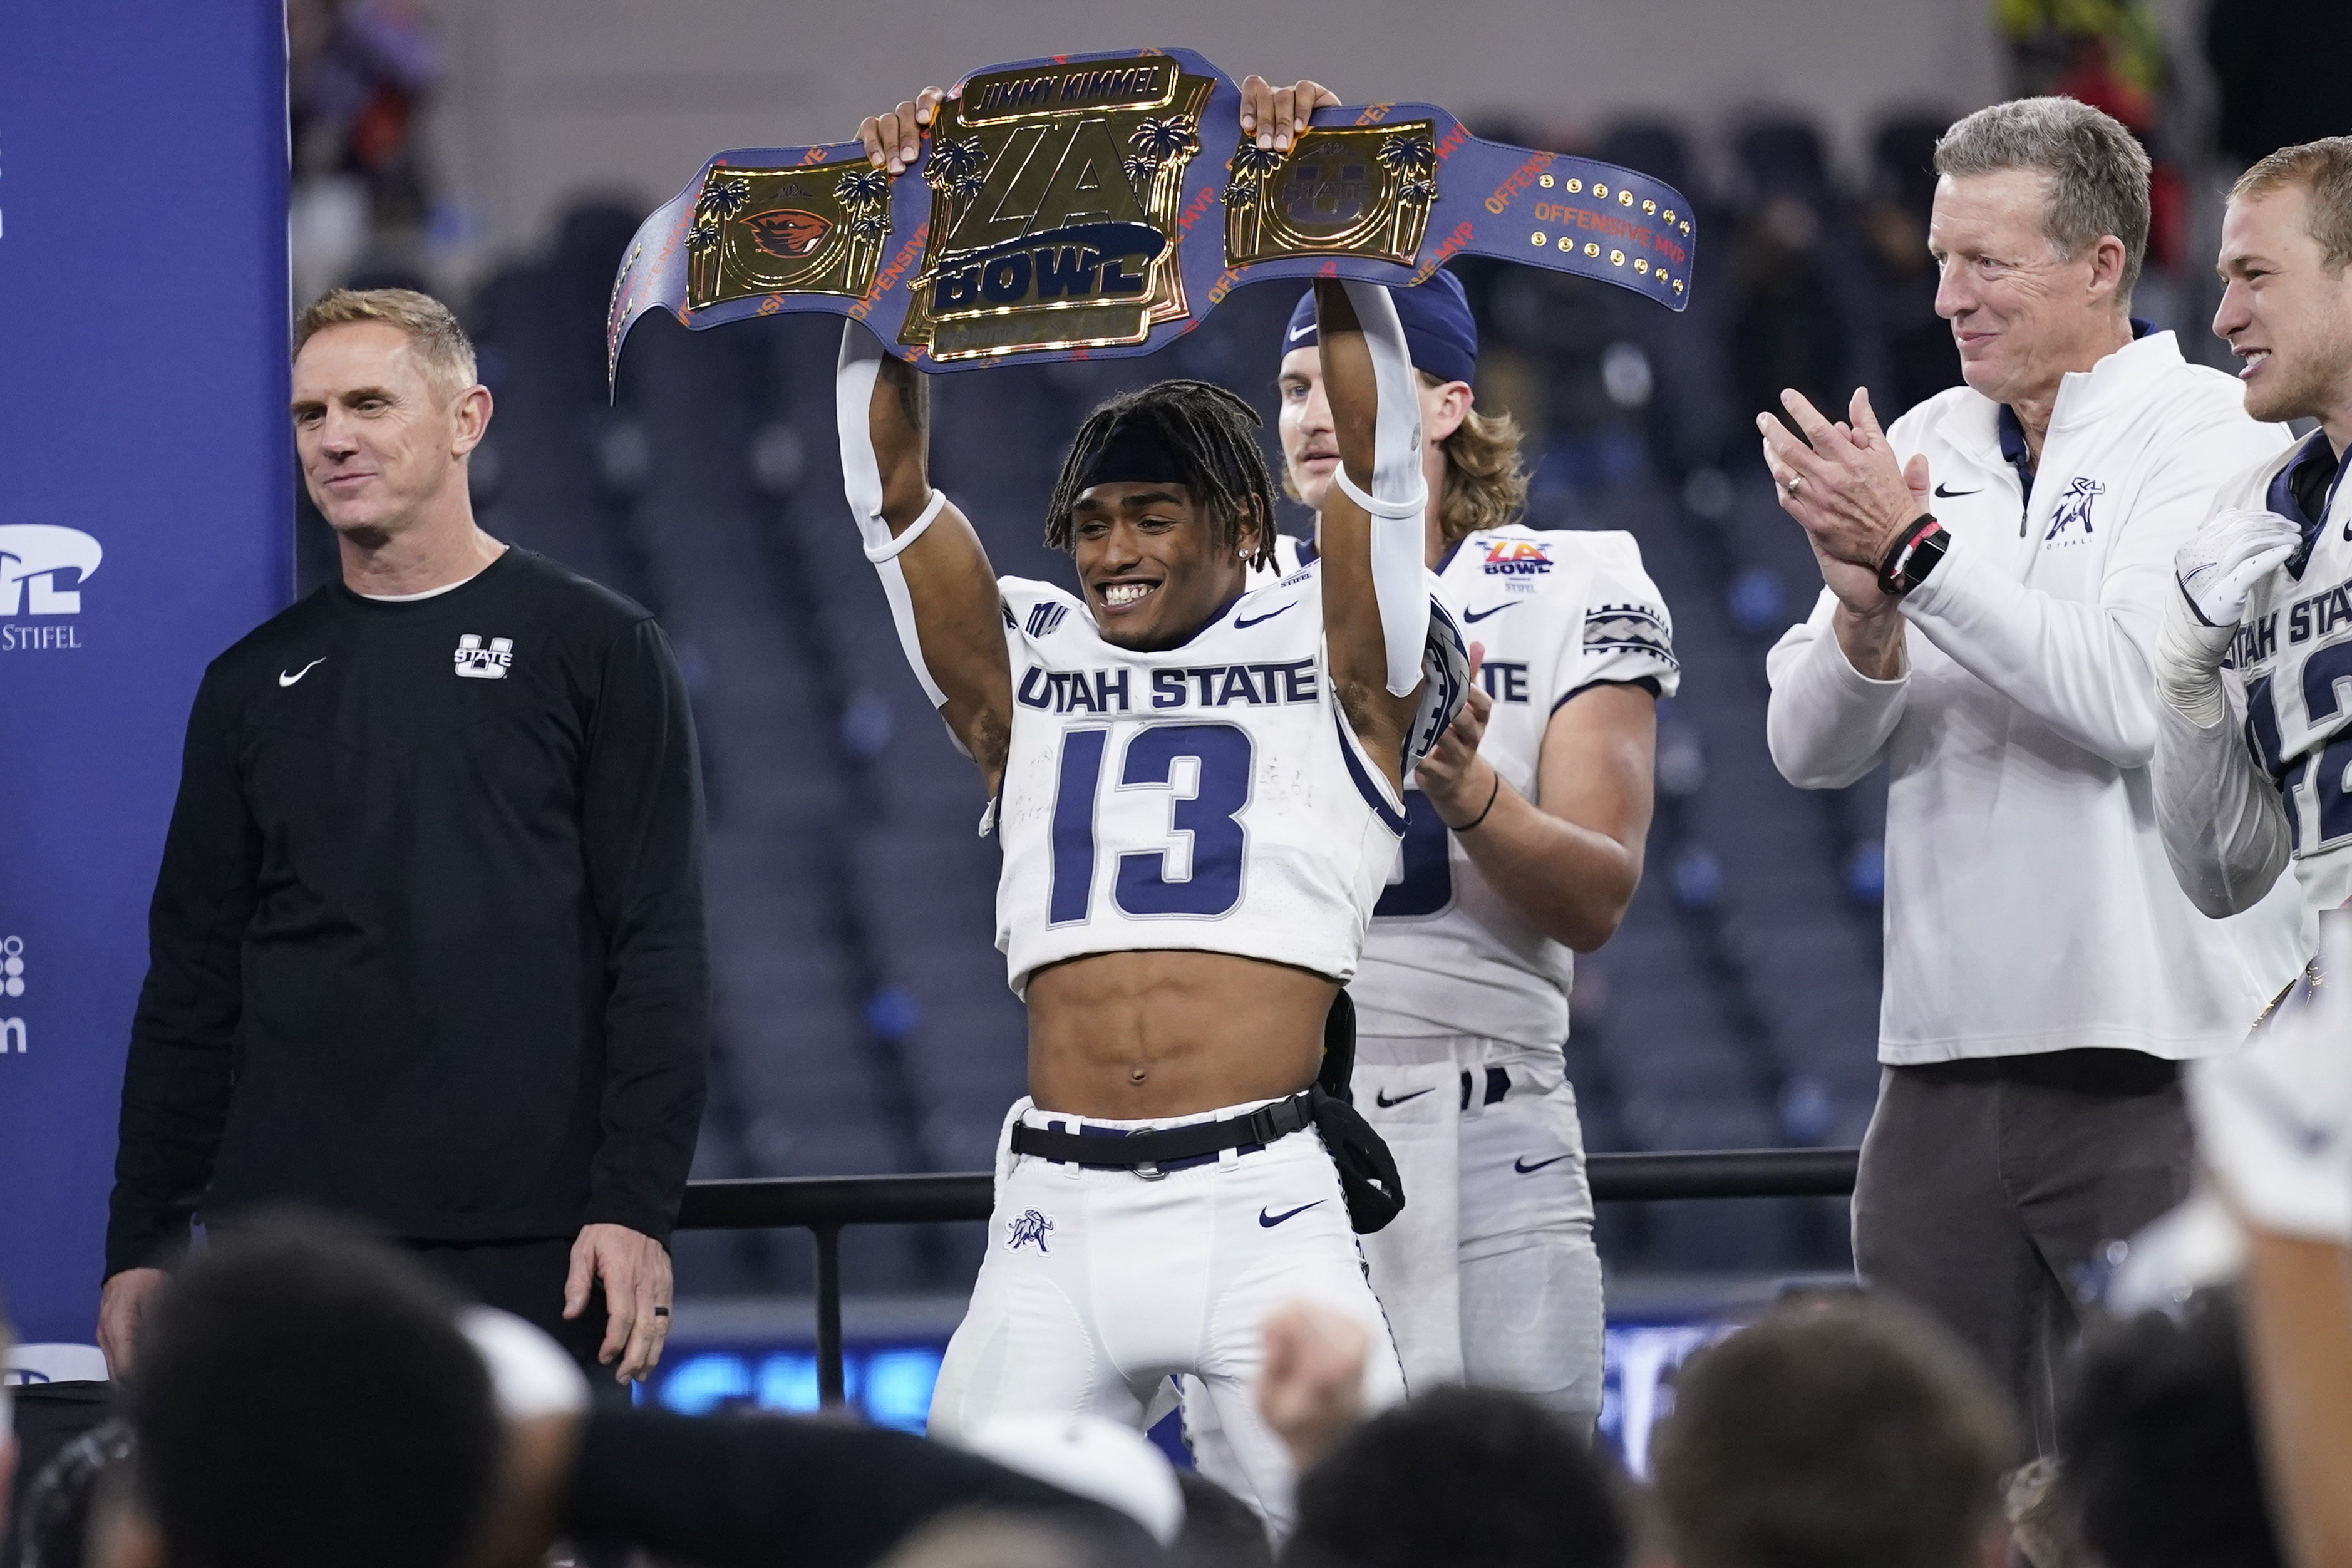 Utah State wide receiver Deven Thompkins (13) holds a championship belt after they beat Oregon State.